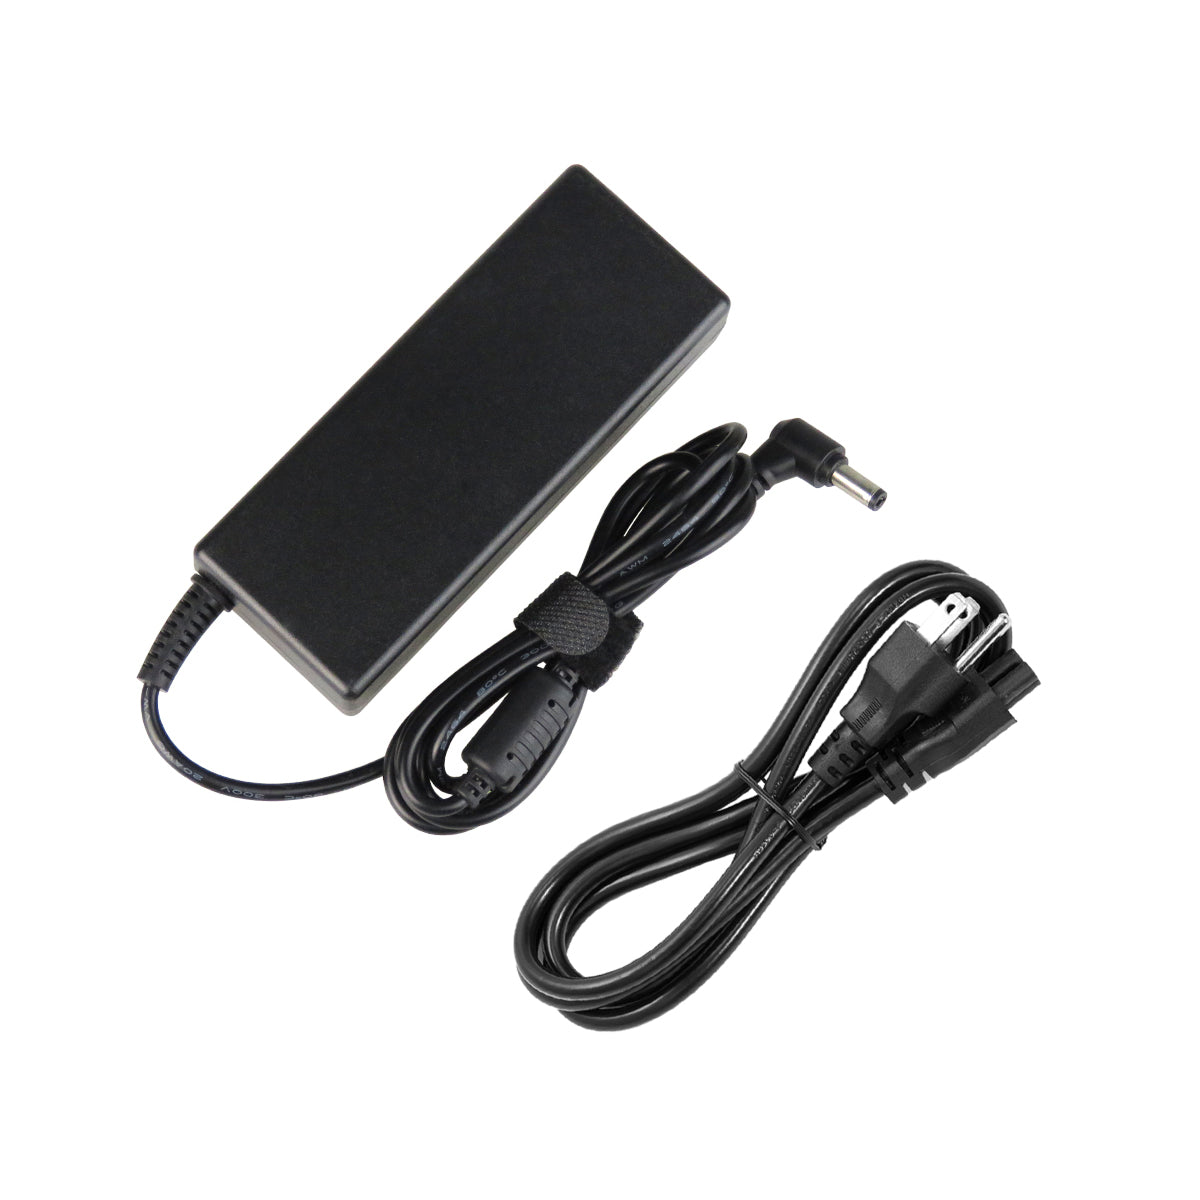 AC Adapter Charger for Toshiba Satellite p875 Notebook.